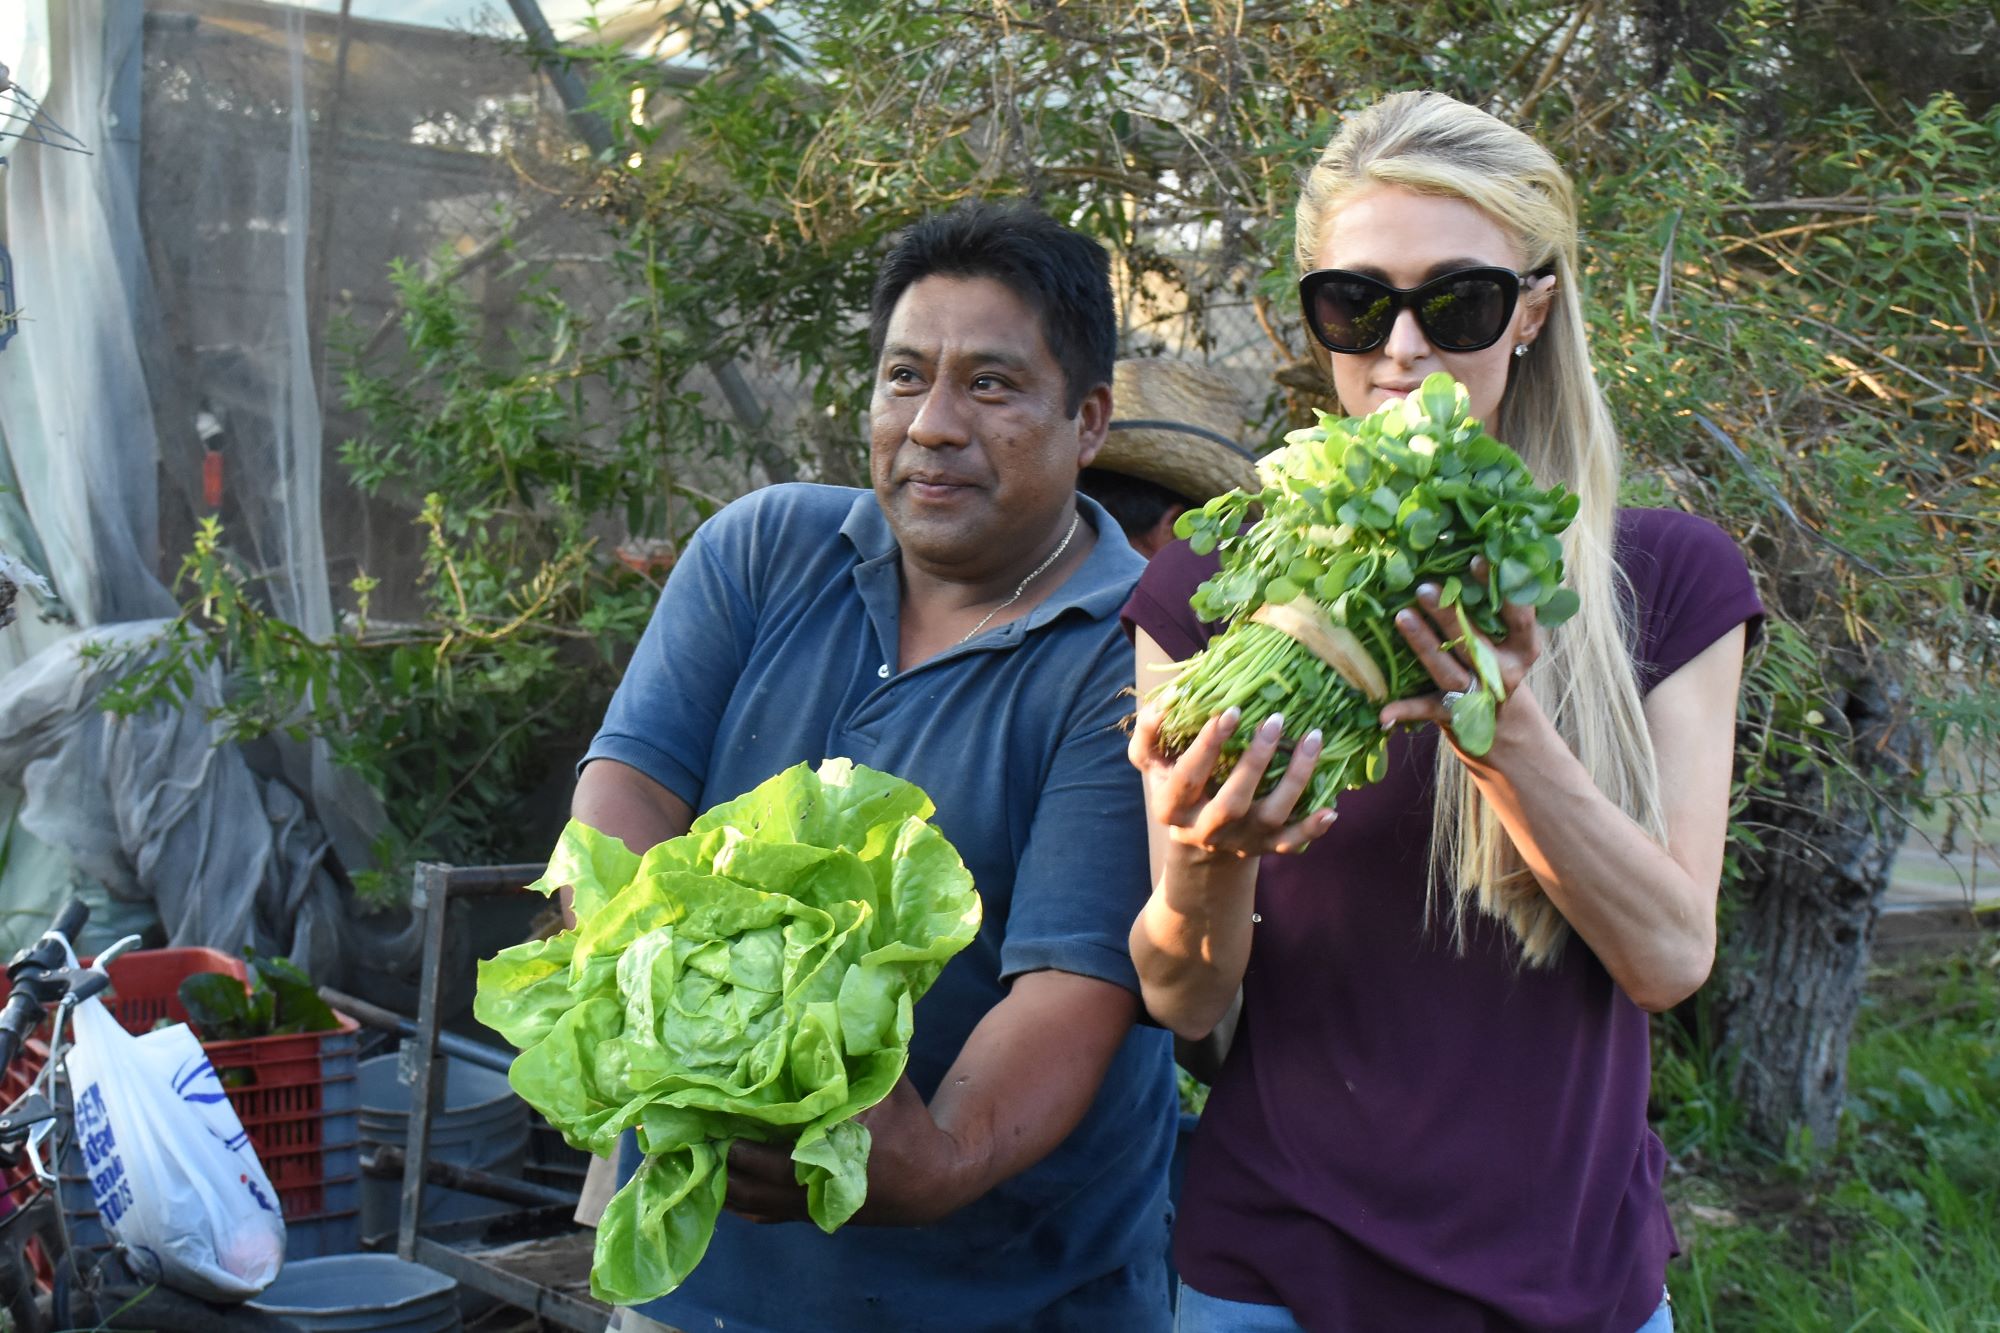 Paris Hilton holding lettuce from a farm visit in Mexico